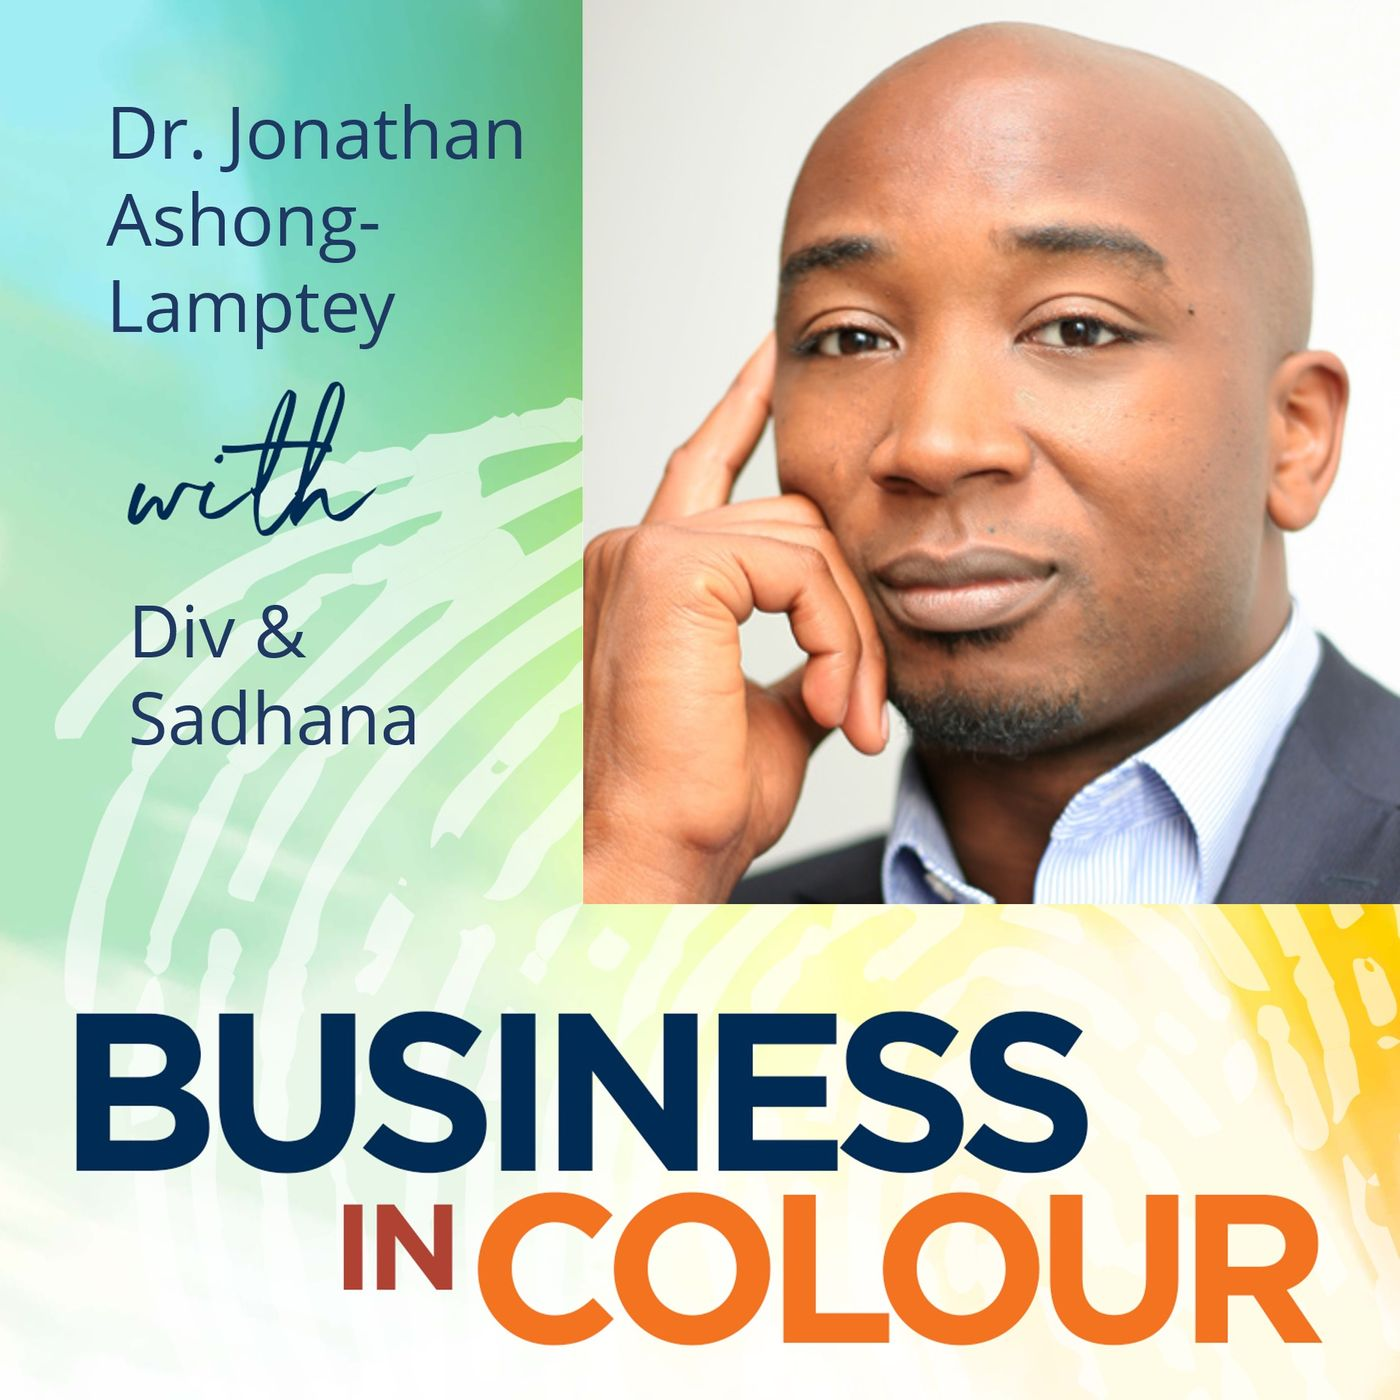 Dr. Jonathan Ashong-Lamptey/ Is D&I a Grudge Purchase?